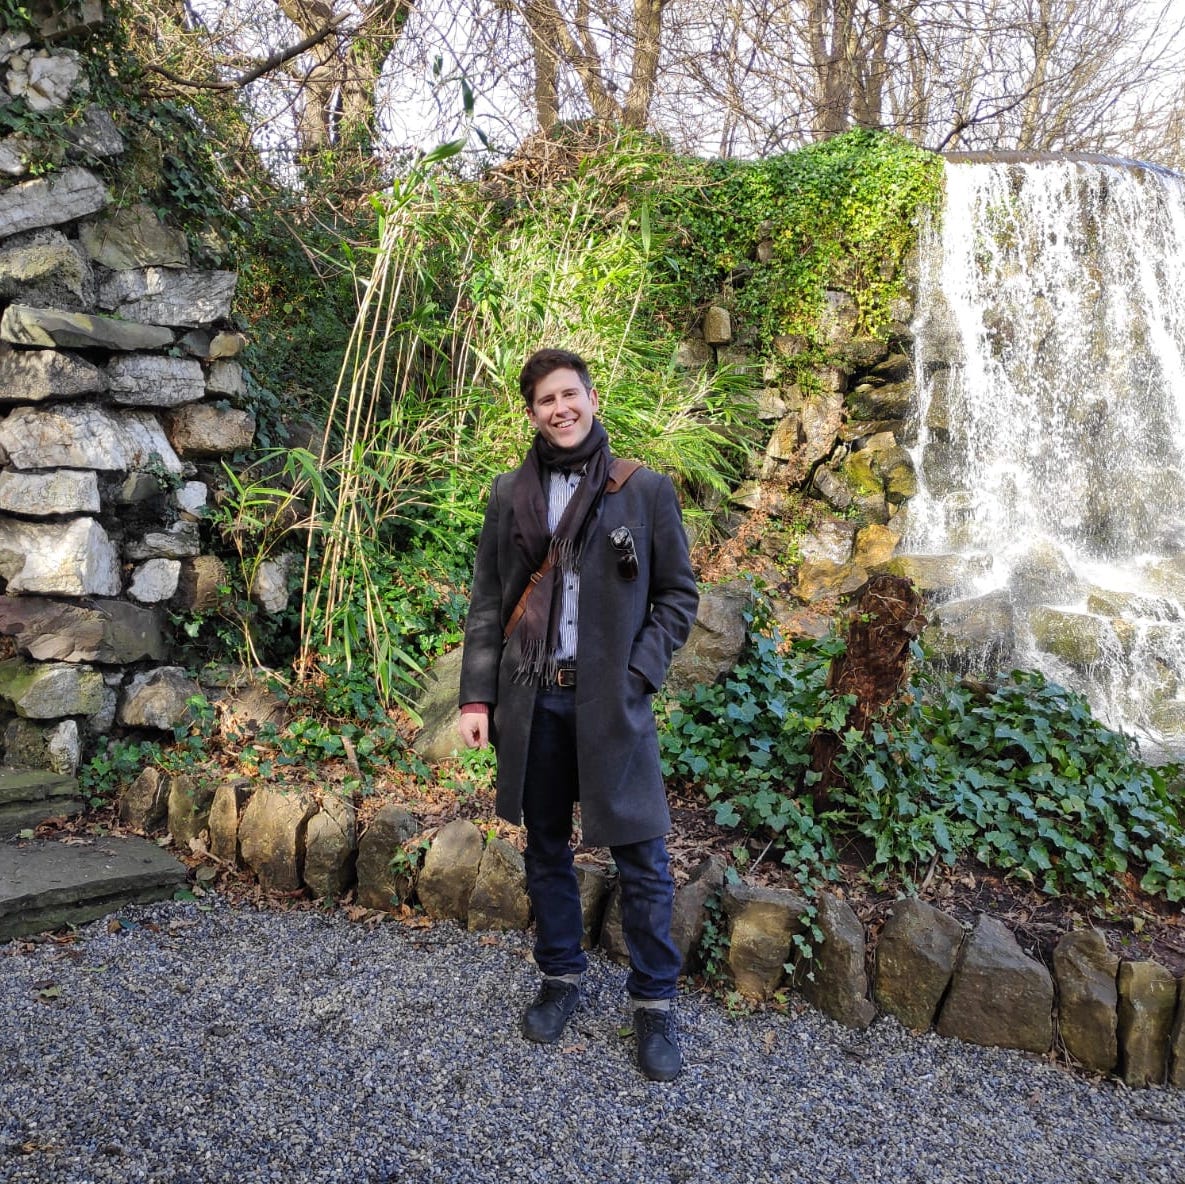 Michael smiling and standing on a stone path, in front of a small archway and waterfall. 